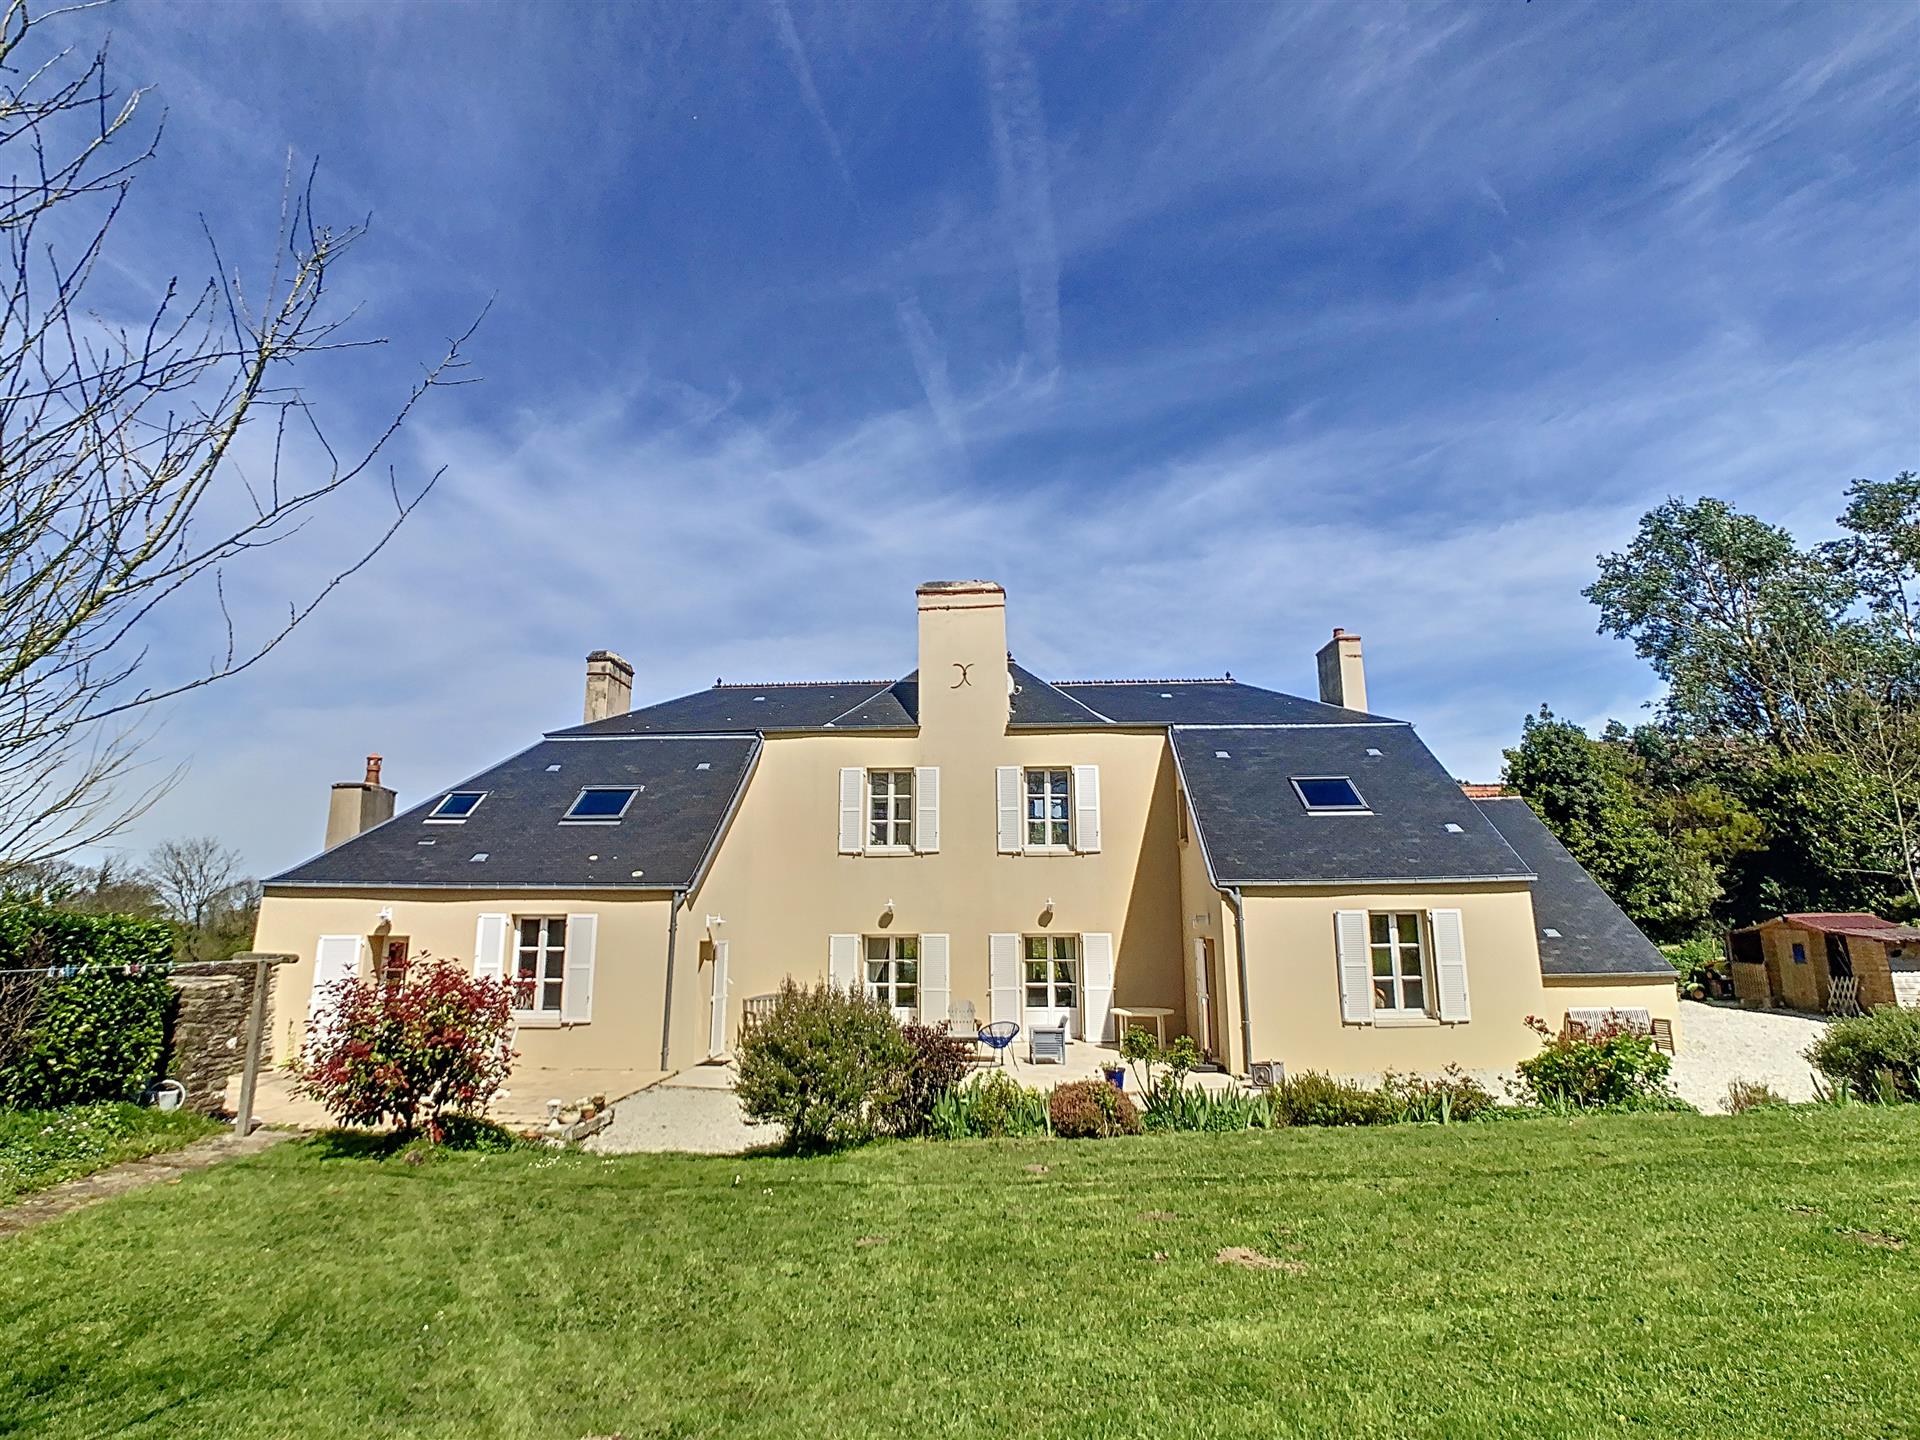 18th century property 4 kms from Cherbourg city center